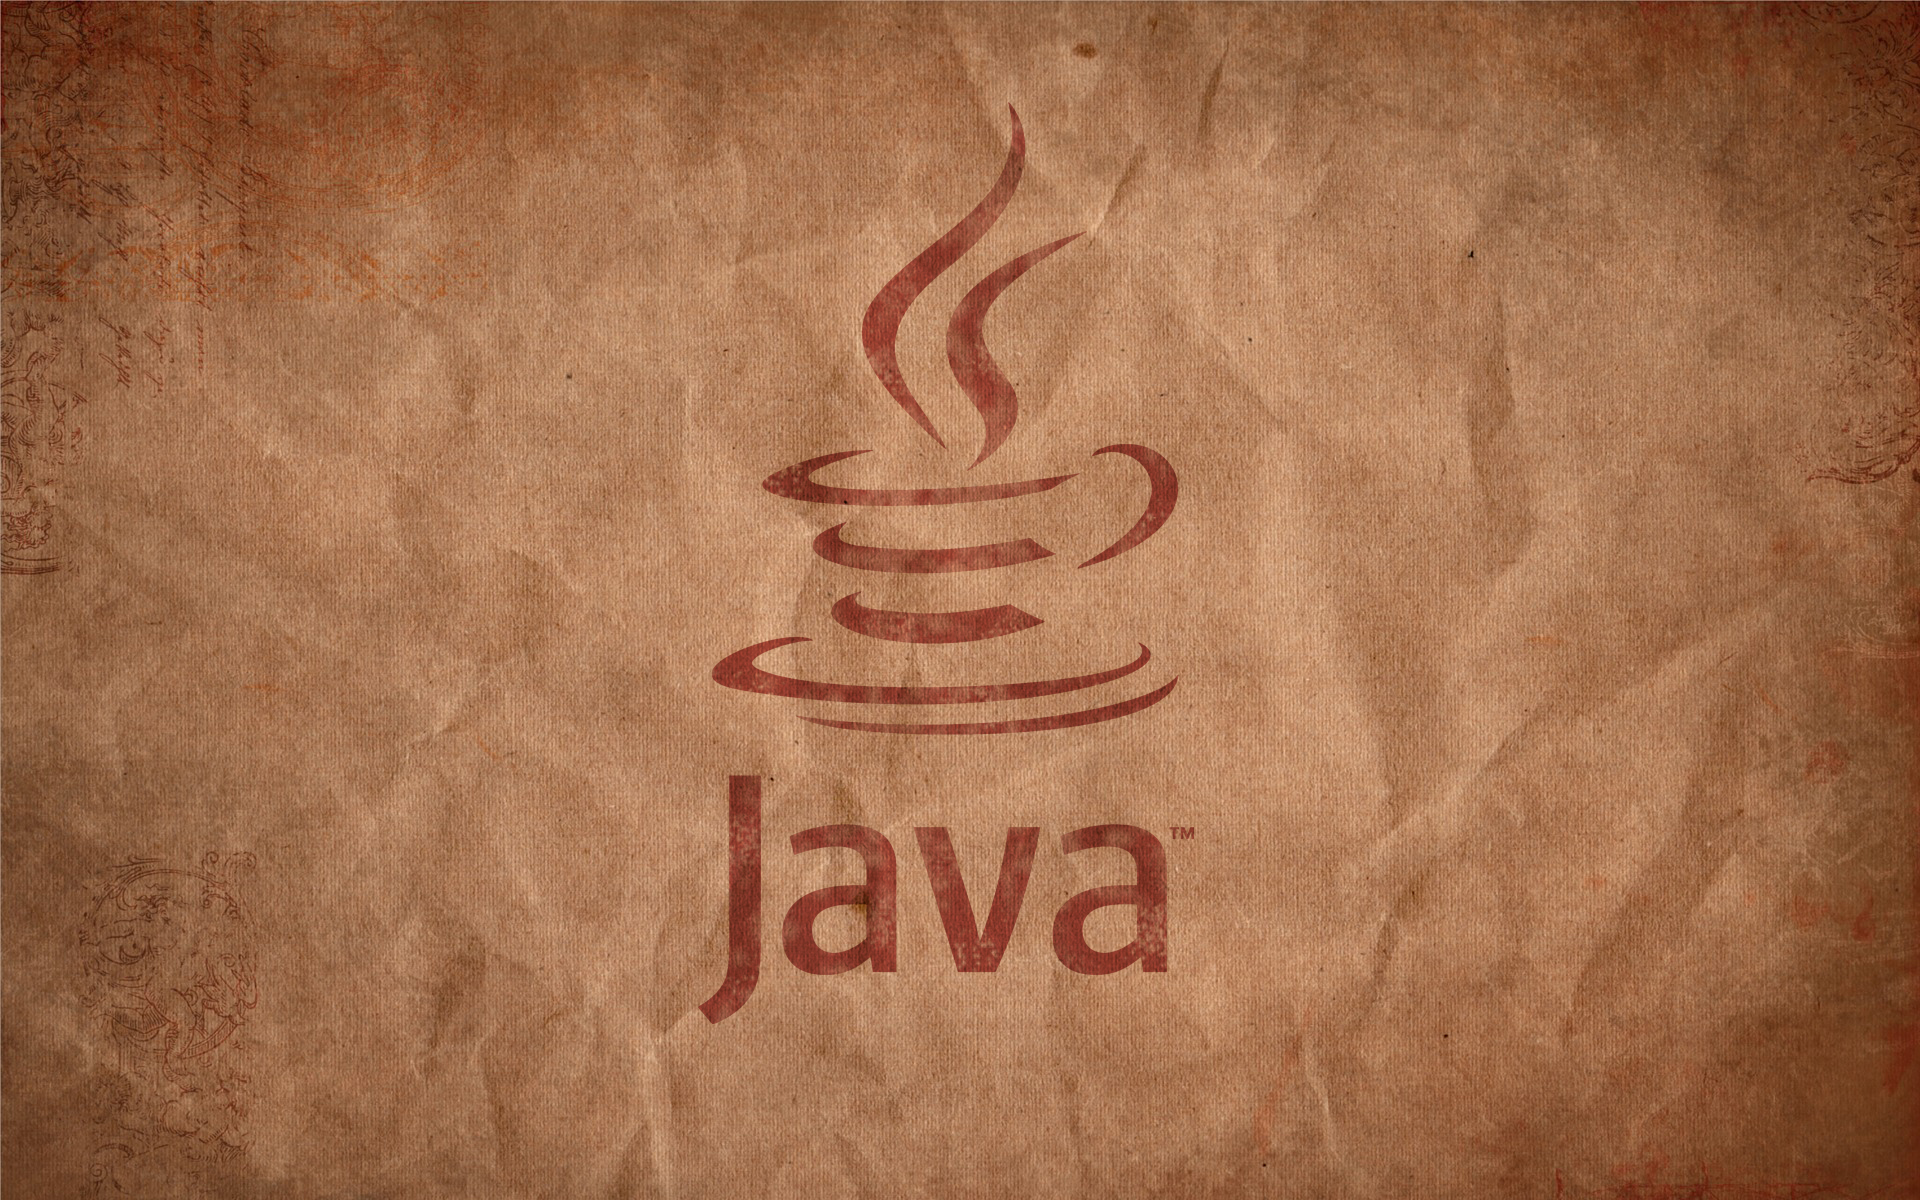 Java for steam фото 40